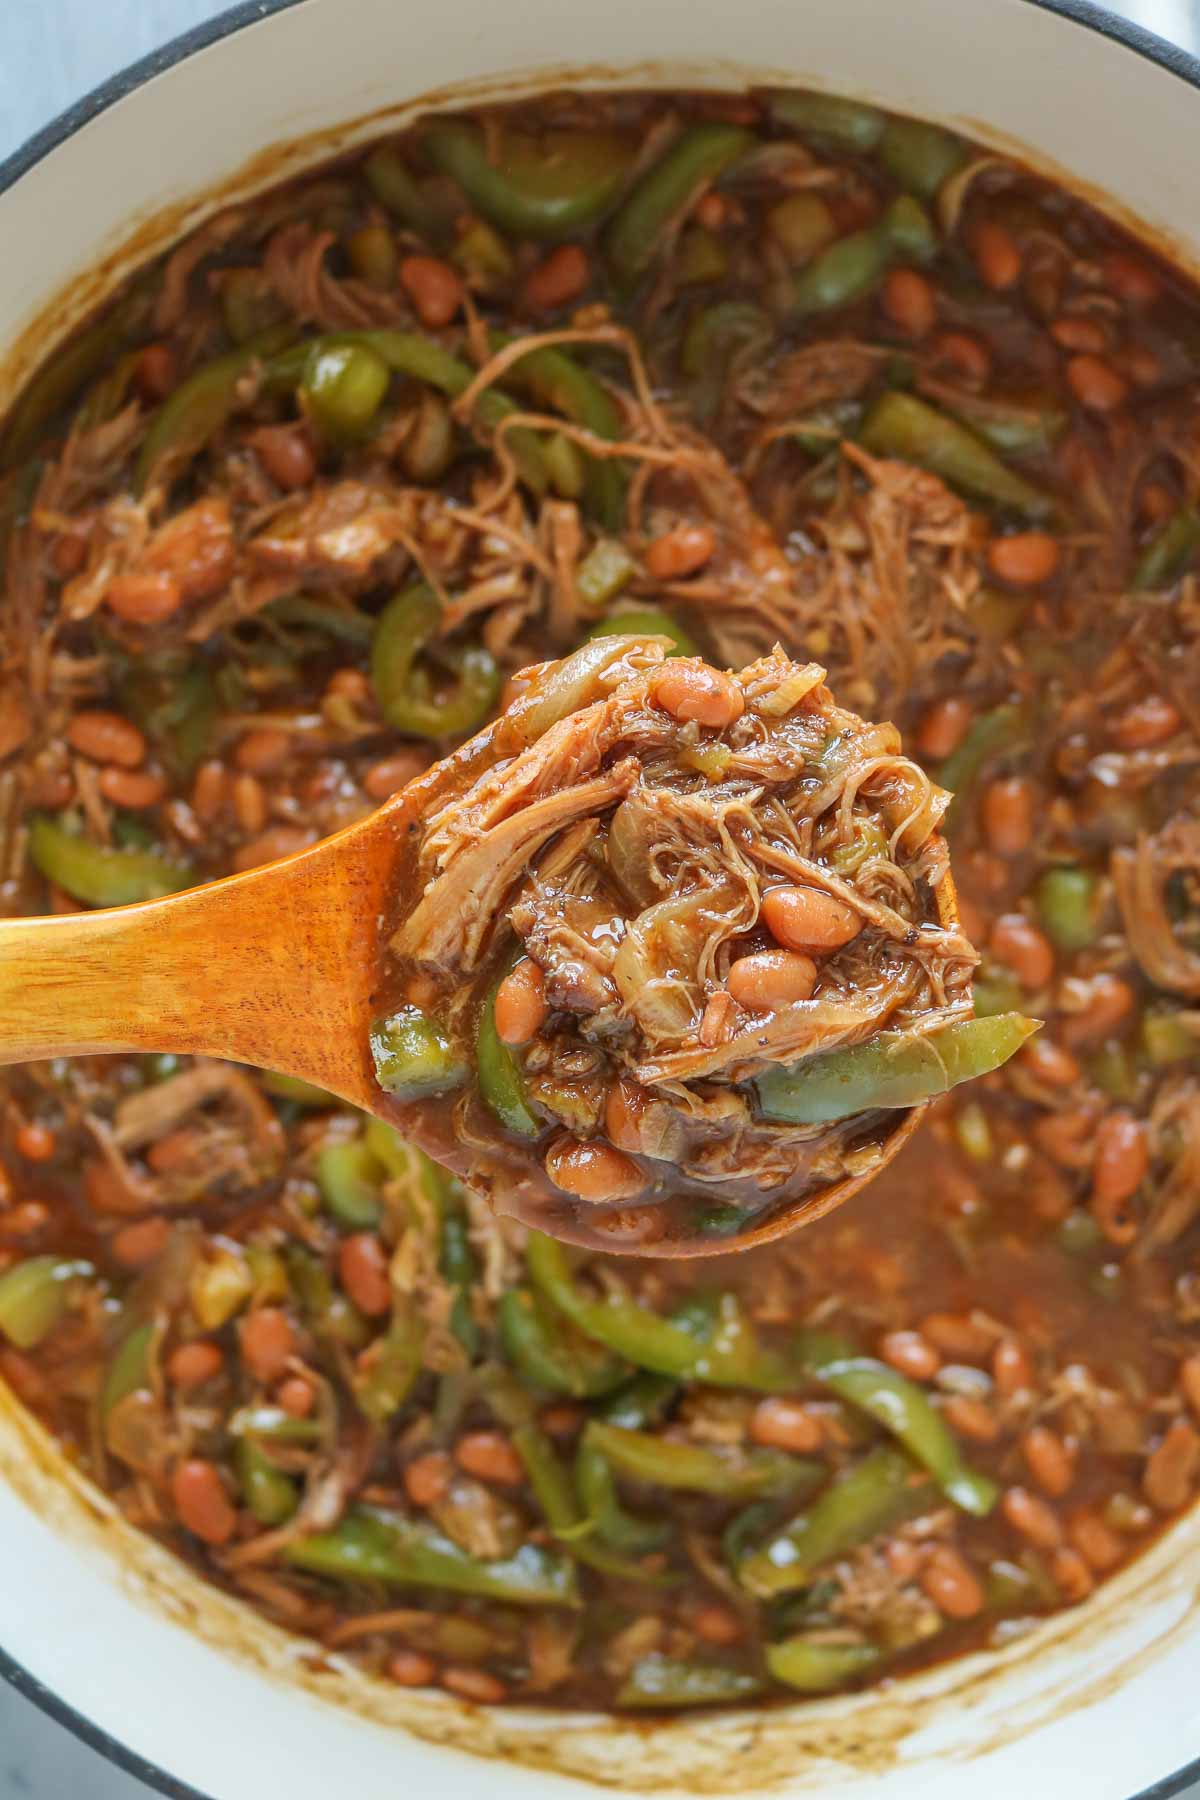 Ladle of pulled pork and beans from a pan.